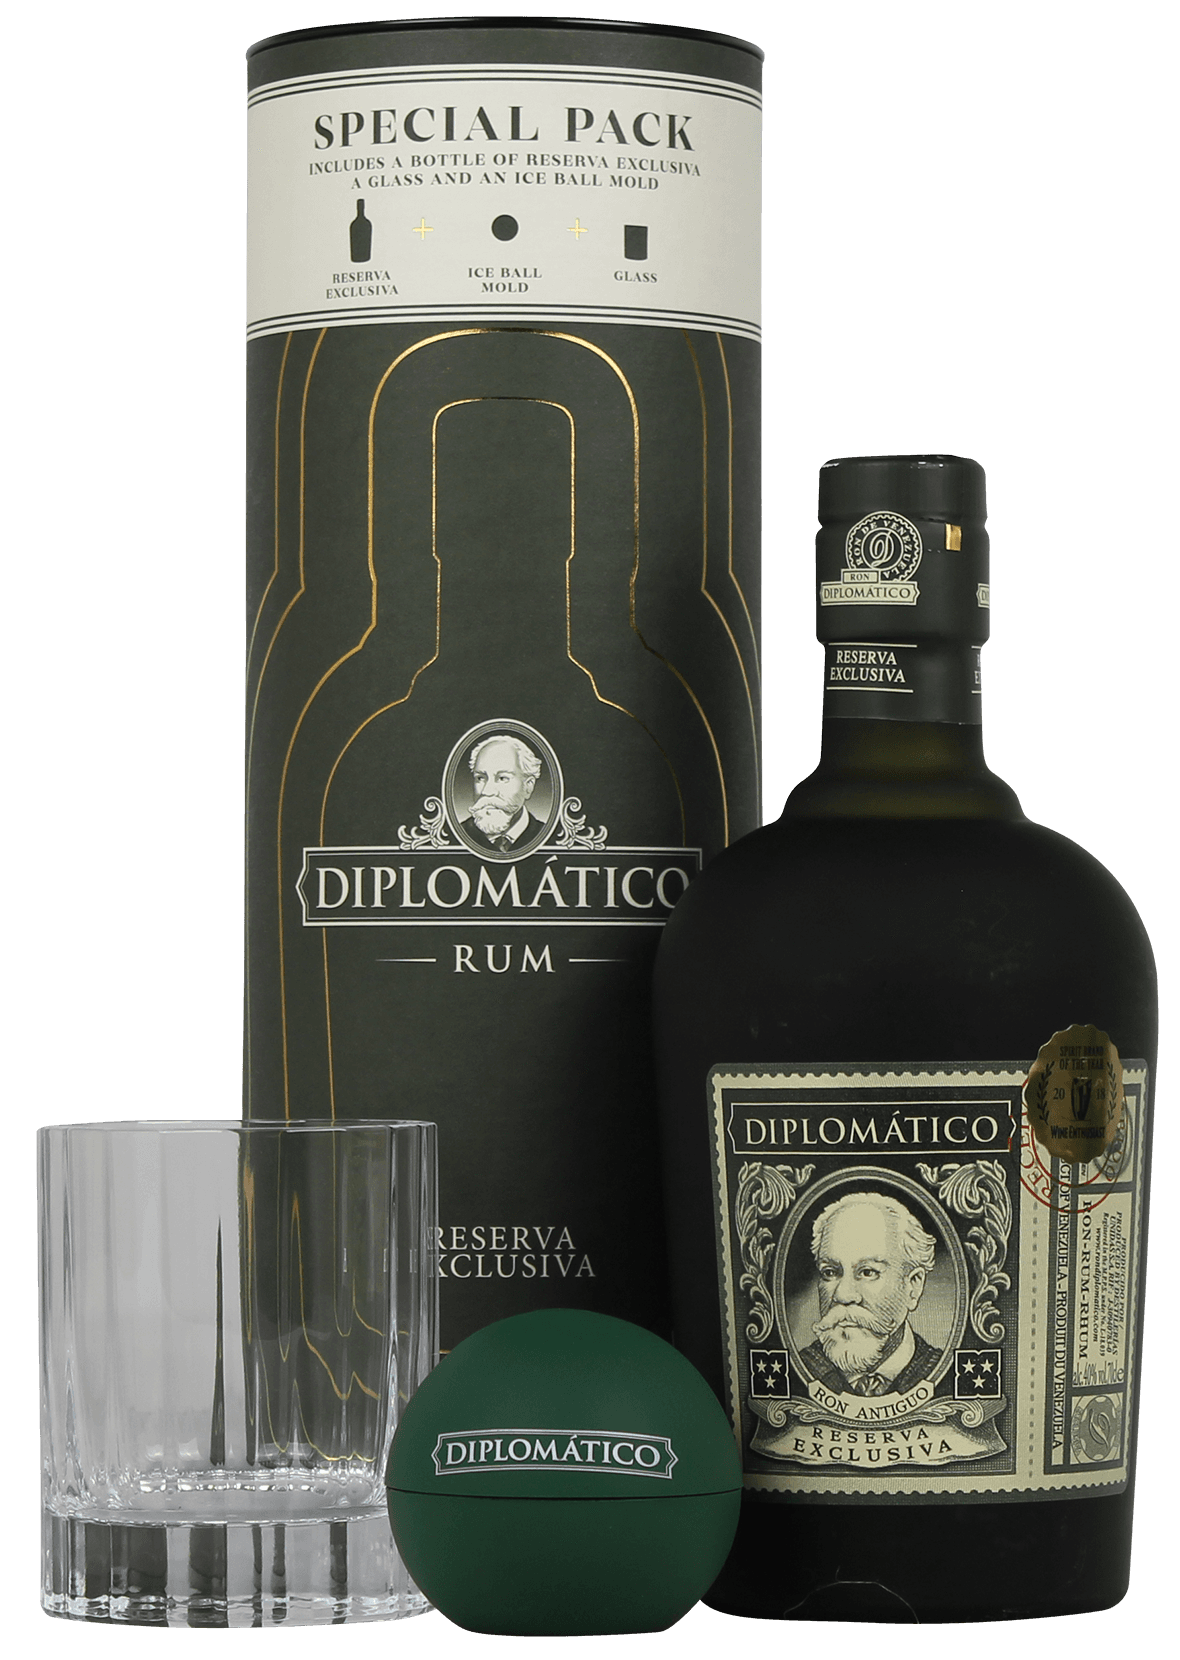 Ron Diplomatico Reserva Exclusiva Tall Canister 40% alcohol - Rum | Kaliman  Caribe